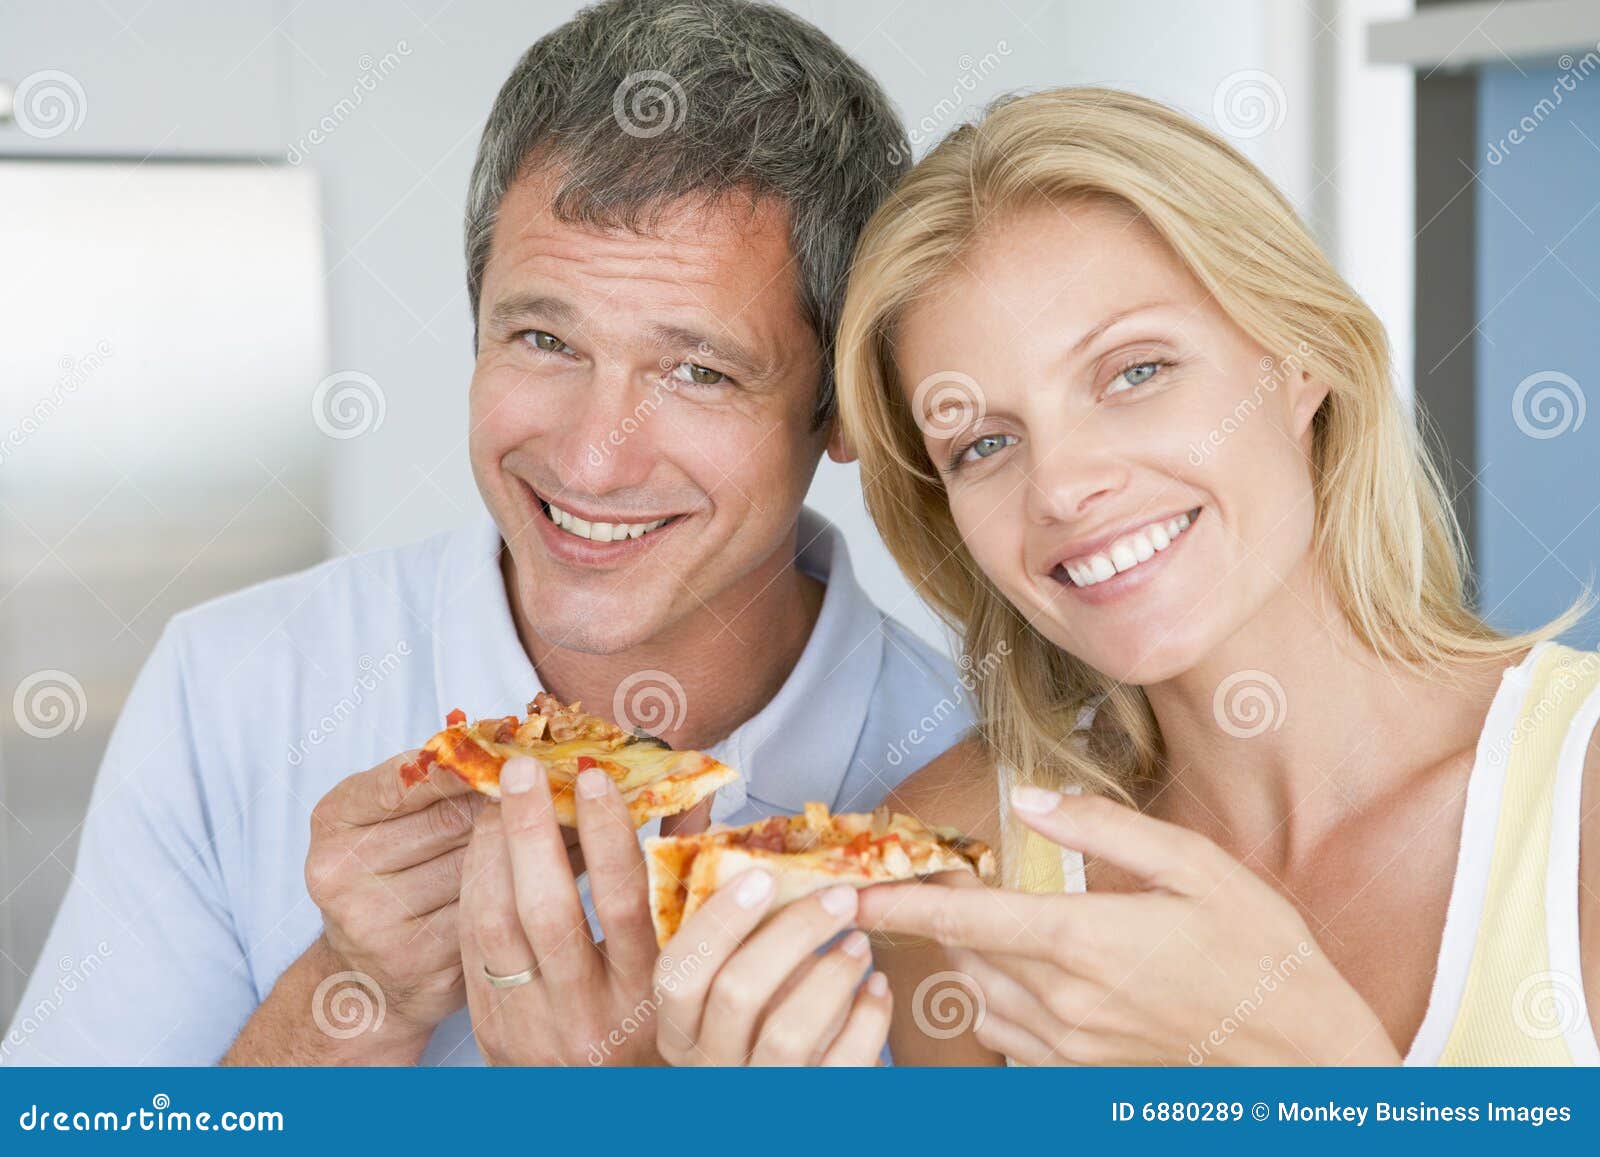 Husband And Wife Eating Pizza Royalty Free Stock Images photo